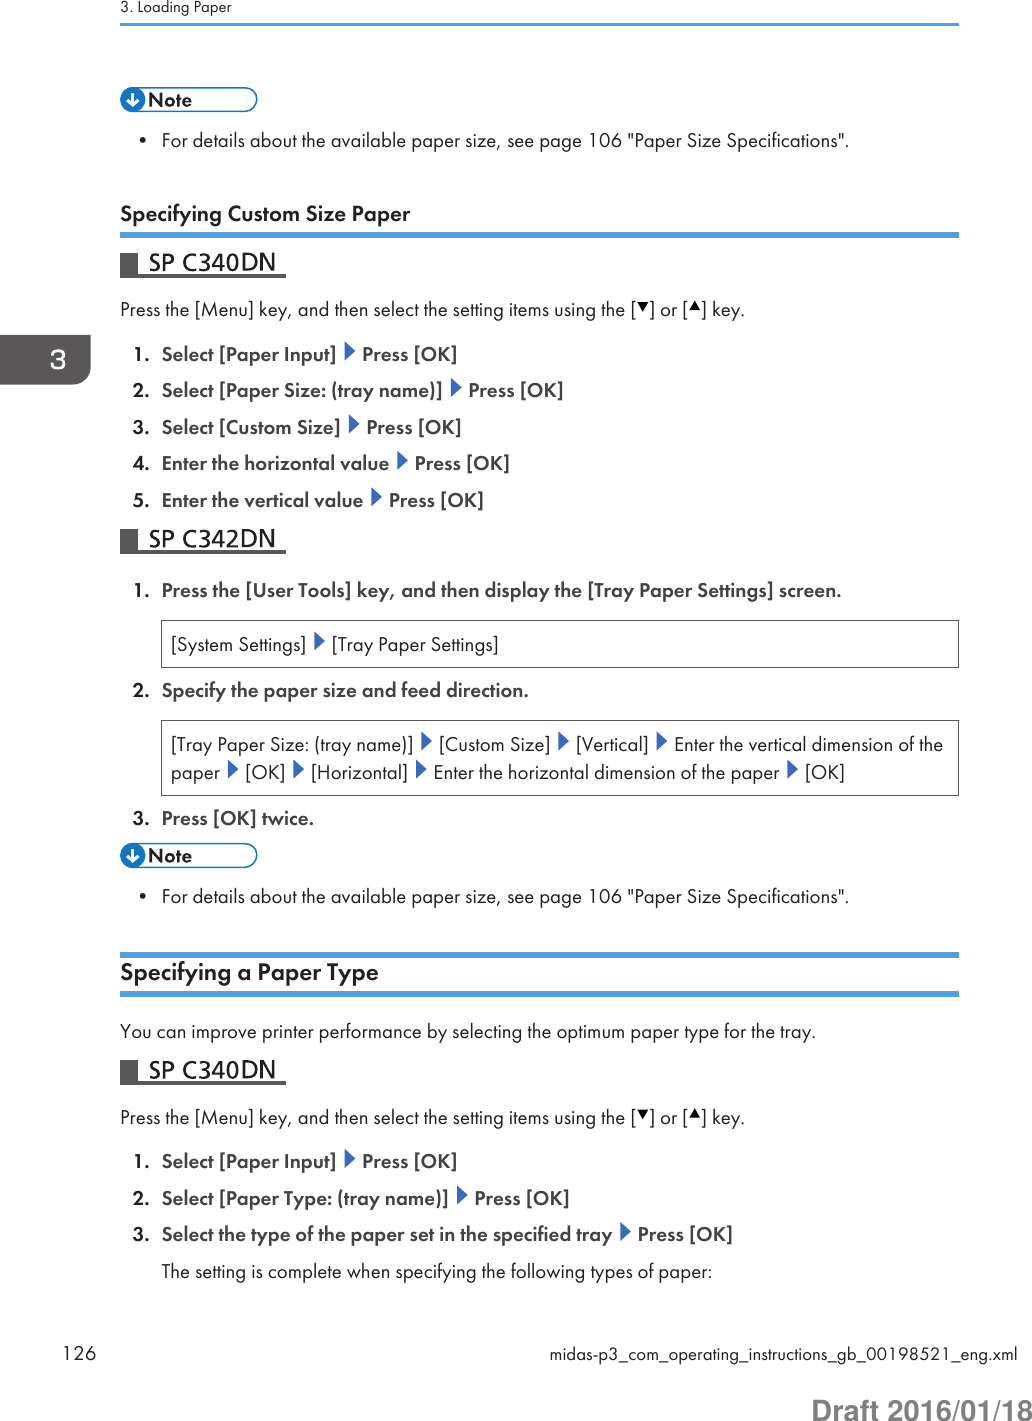 • For details about the available paper size, see page 106 &quot;Paper Size Specifications&quot;.Specifying Custom Size PaperPress the [Menu] key, and then select the setting items using the [ ] or [ ] key.1. Select [Paper Input]   Press [OK]2. Select [Paper Size: (tray name)]   Press [OK]3. Select [Custom Size]   Press [OK]4. Enter the horizontal value   Press [OK]5. Enter the vertical value   Press [OK]1. Press the [User Tools] key, and then display the [Tray Paper Settings] screen.[System Settings]   [Tray Paper Settings]2. Specify the paper size and feed direction.[Tray Paper Size: (tray name)]   [Custom Size]   [Vertical]   Enter the vertical dimension of thepaper   [OK]   [Horizontal]   Enter the horizontal dimension of the paper   [OK]3. Press [OK] twice.• For details about the available paper size, see page 106 &quot;Paper Size Specifications&quot;.Specifying a Paper TypeYou can improve printer performance by selecting the optimum paper type for the tray.Press the [Menu] key, and then select the setting items using the [ ] or [ ] key.1. Select [Paper Input]   Press [OK]2. Select [Paper Type: (tray name)]   Press [OK]3. Select the type of the paper set in the specified tray   Press [OK]The setting is complete when specifying the following types of paper:3. Loading Paper126 midas-p3_com_operating_instructions_gb_00198521_eng.xmlDraft 2016/01/18